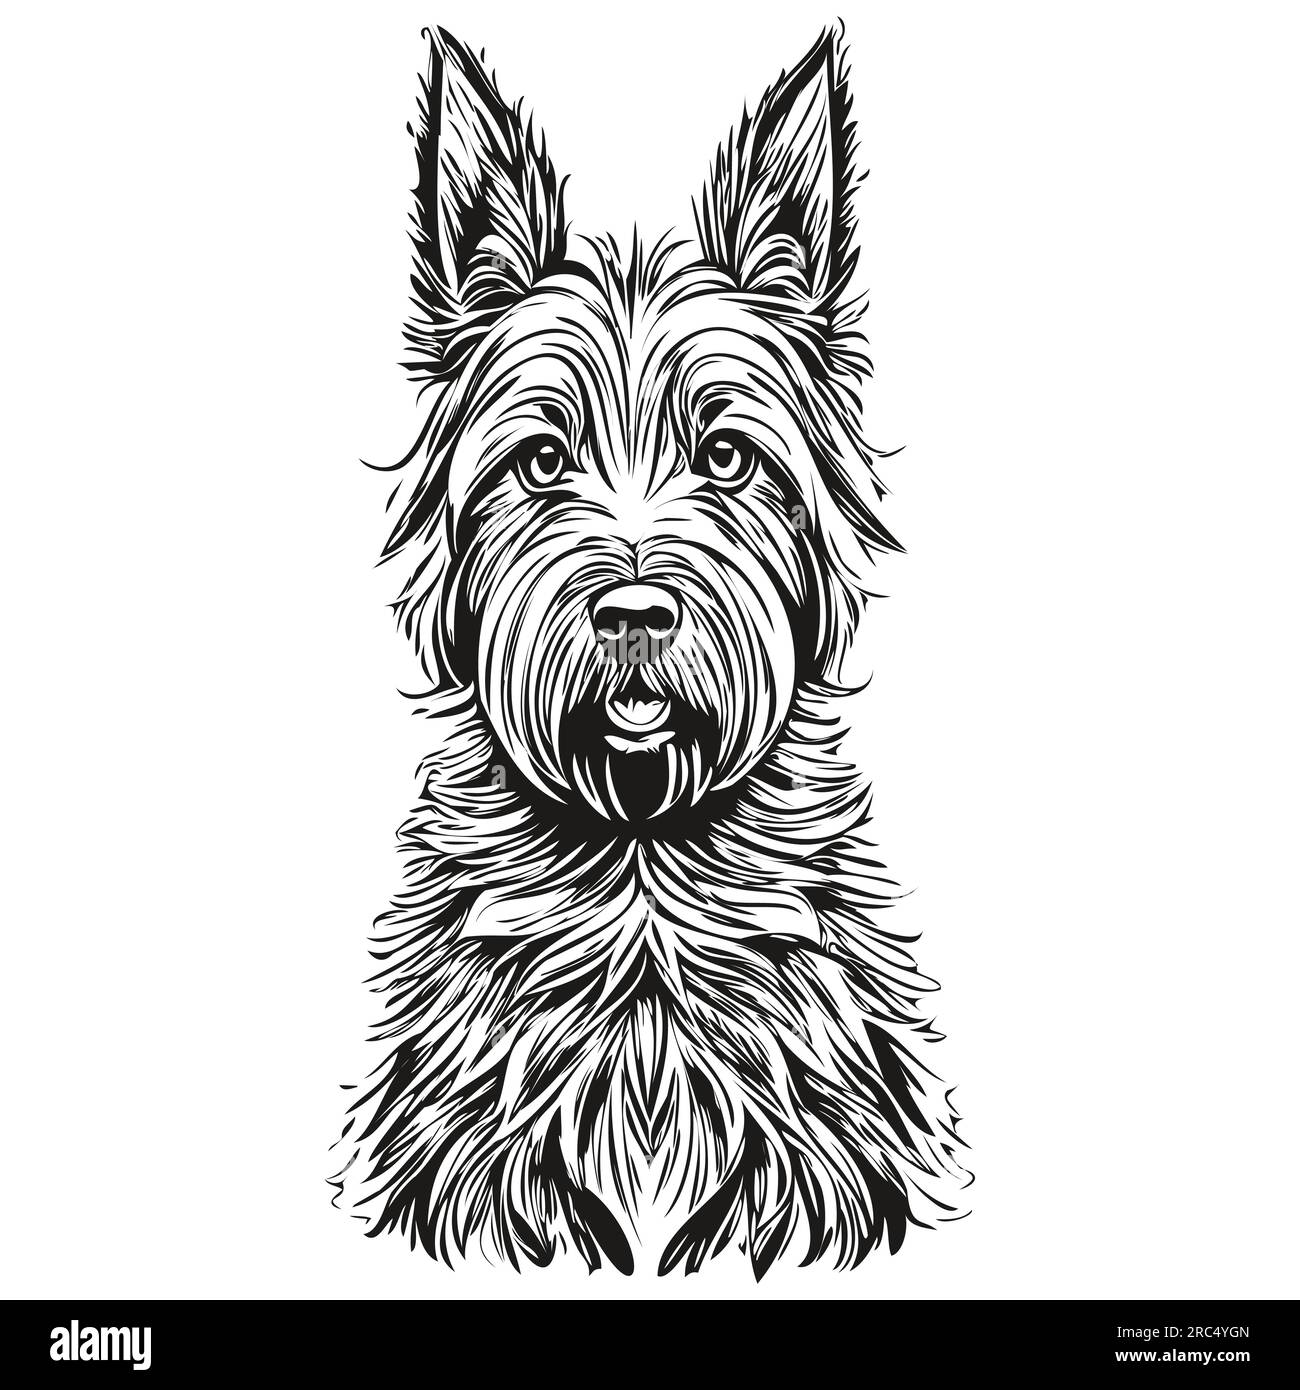 Scottish Terrier dog pet sketch illustration, black and white engraving vector realistic breed pet Stock Vector